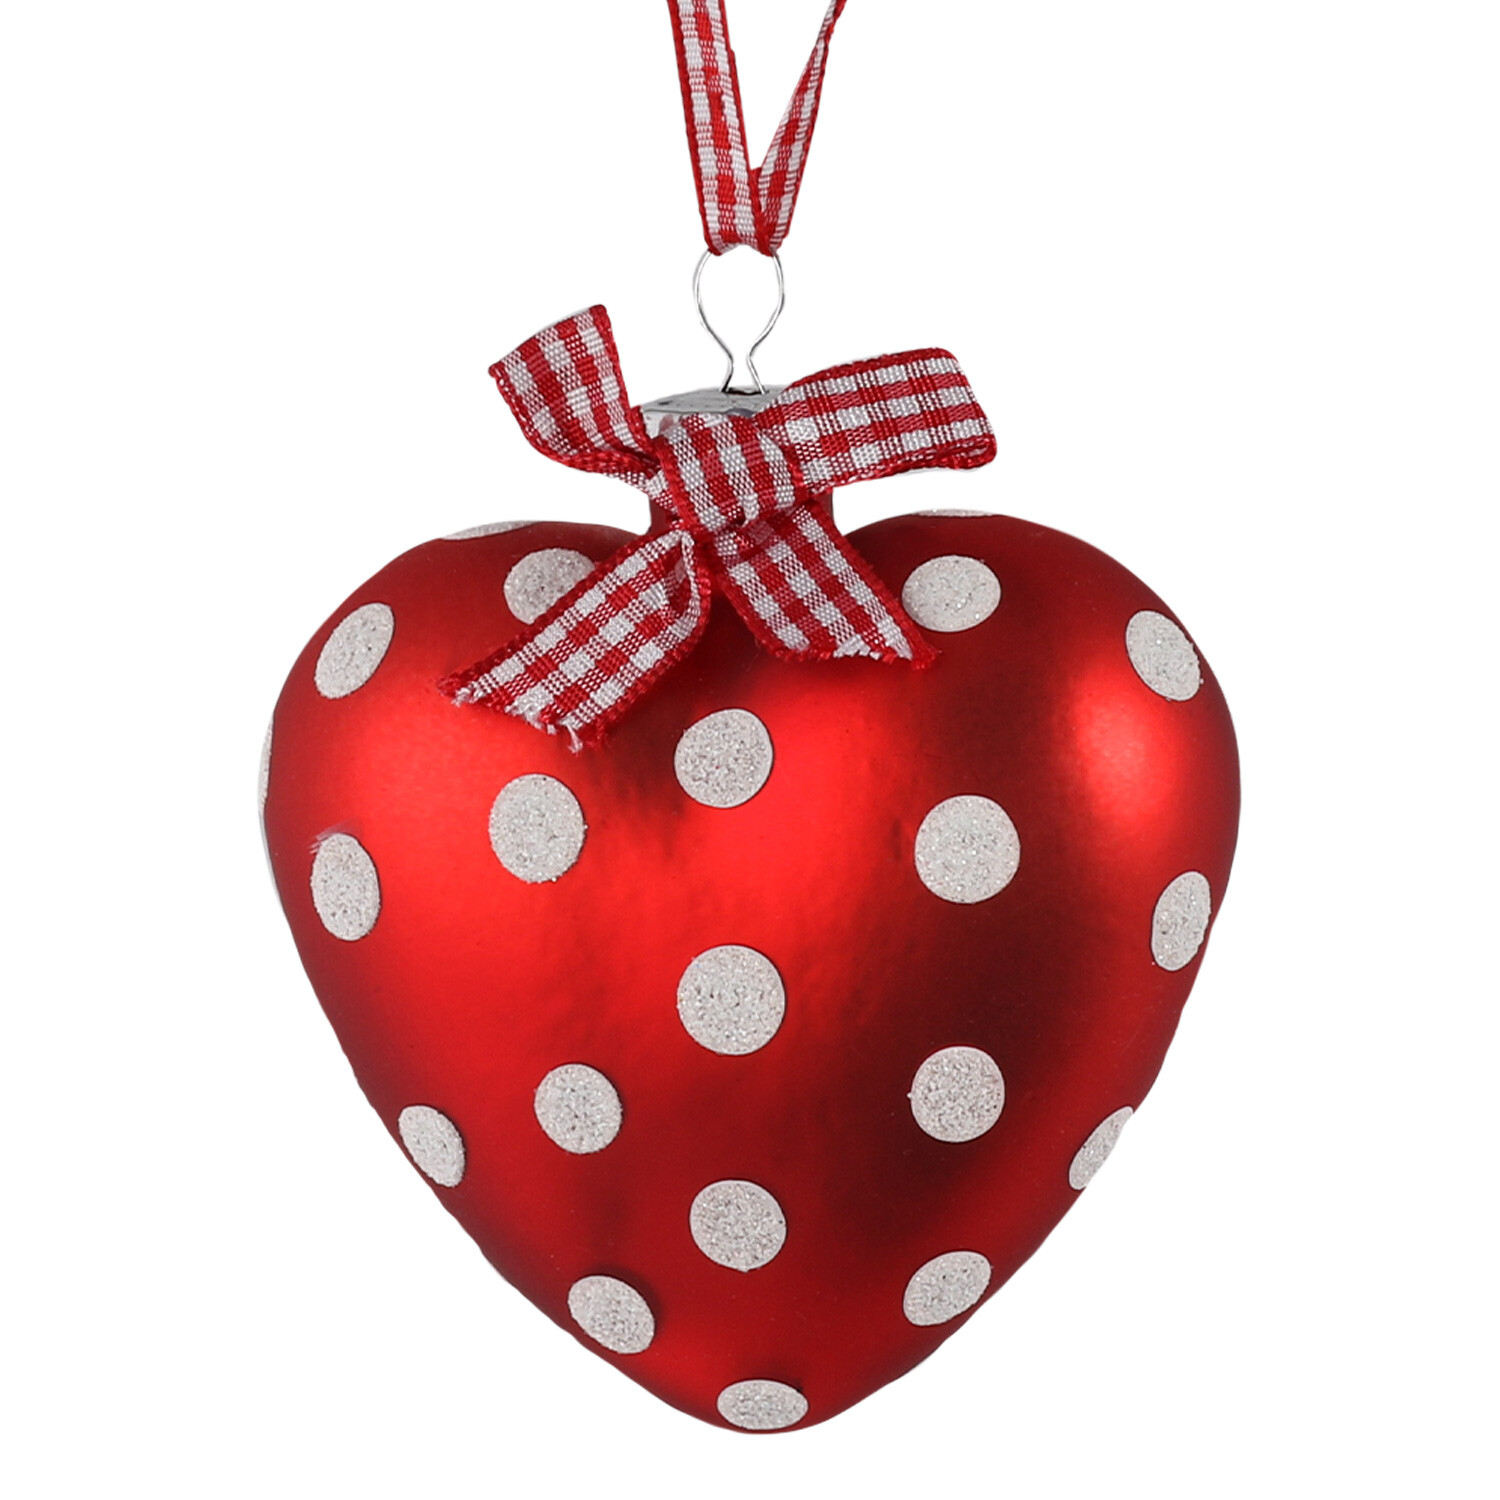 Red and White Polka Dot Heart - Red Image